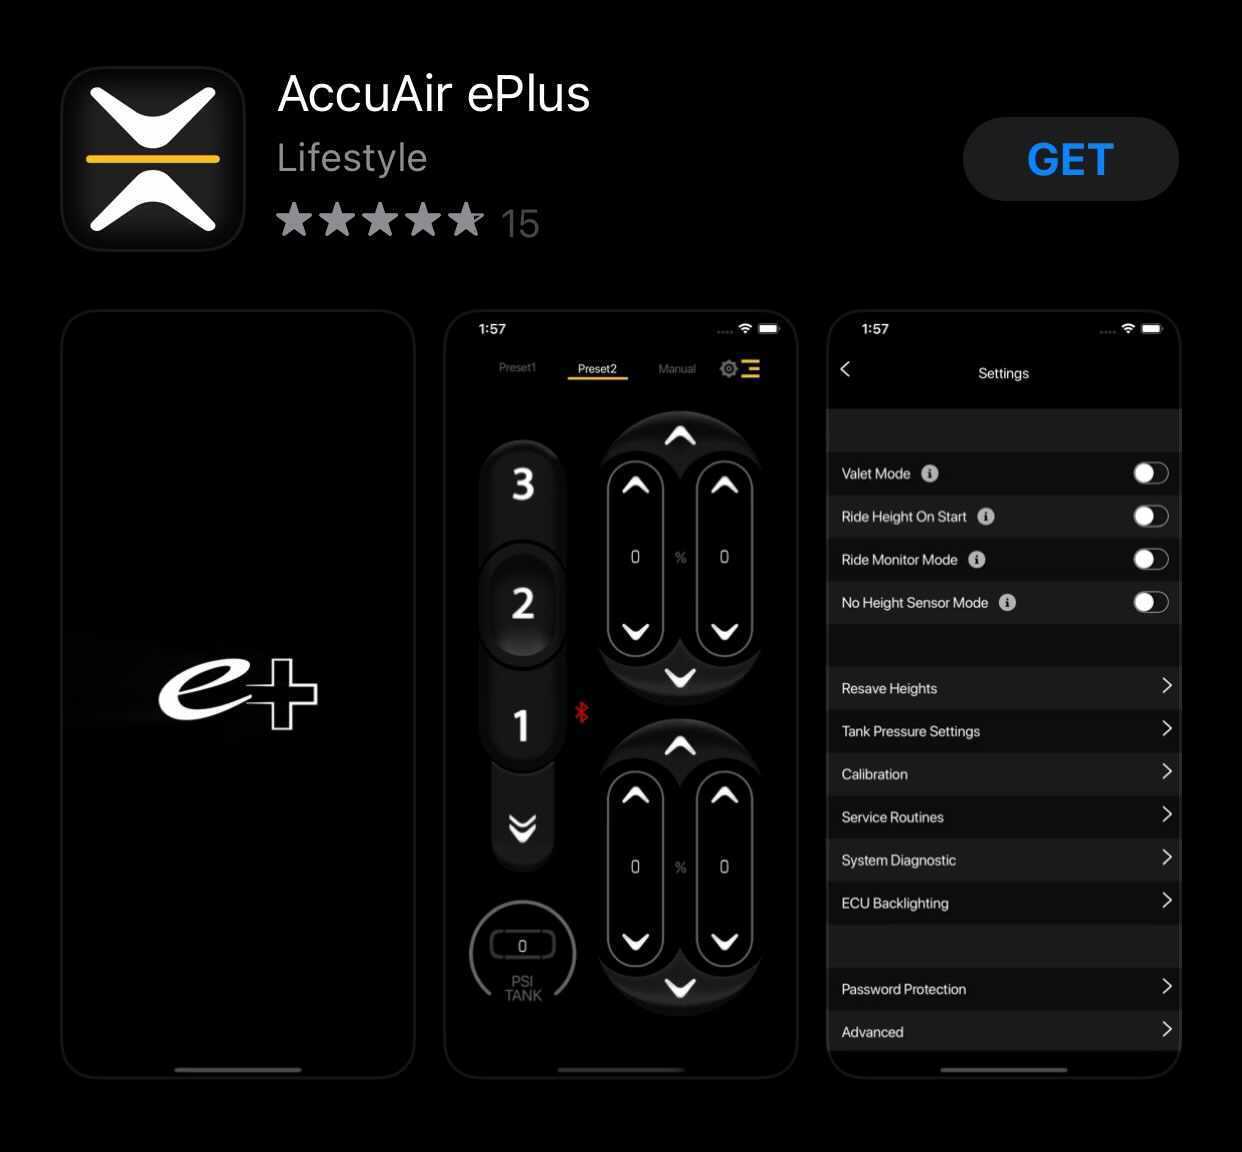 accuair eplus app for iphone and android